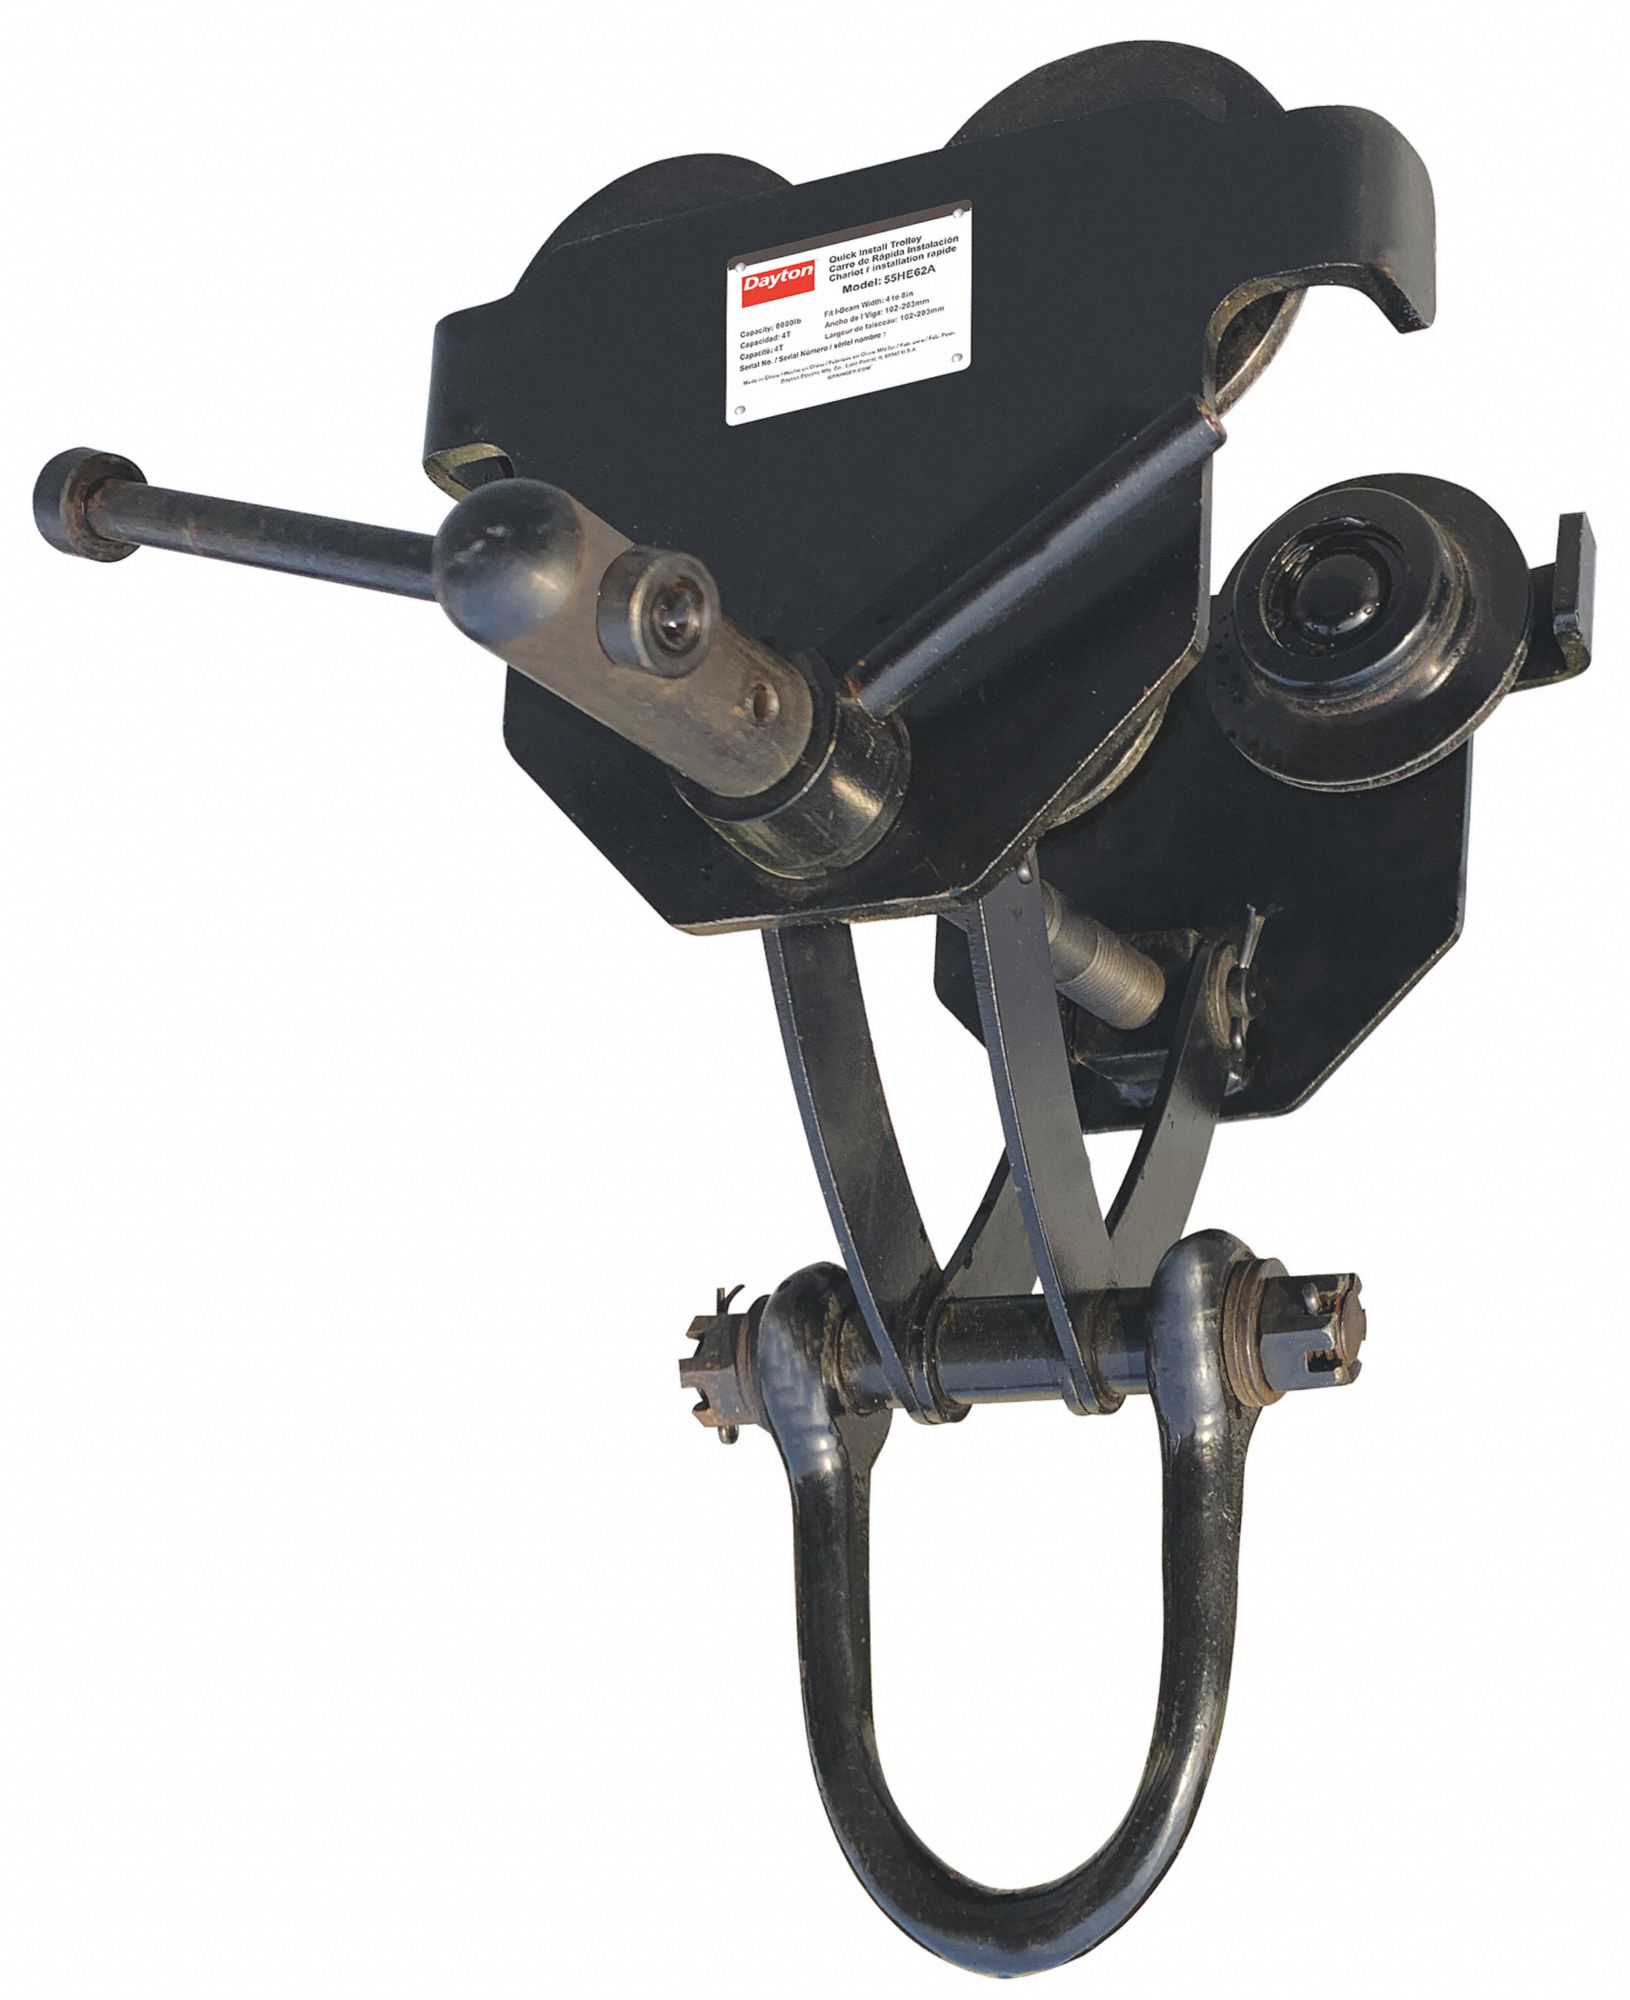 Dayton 8 000 Lb Load Capacity Fits 8 In To 24 1 2 In Beam Ht Trolley